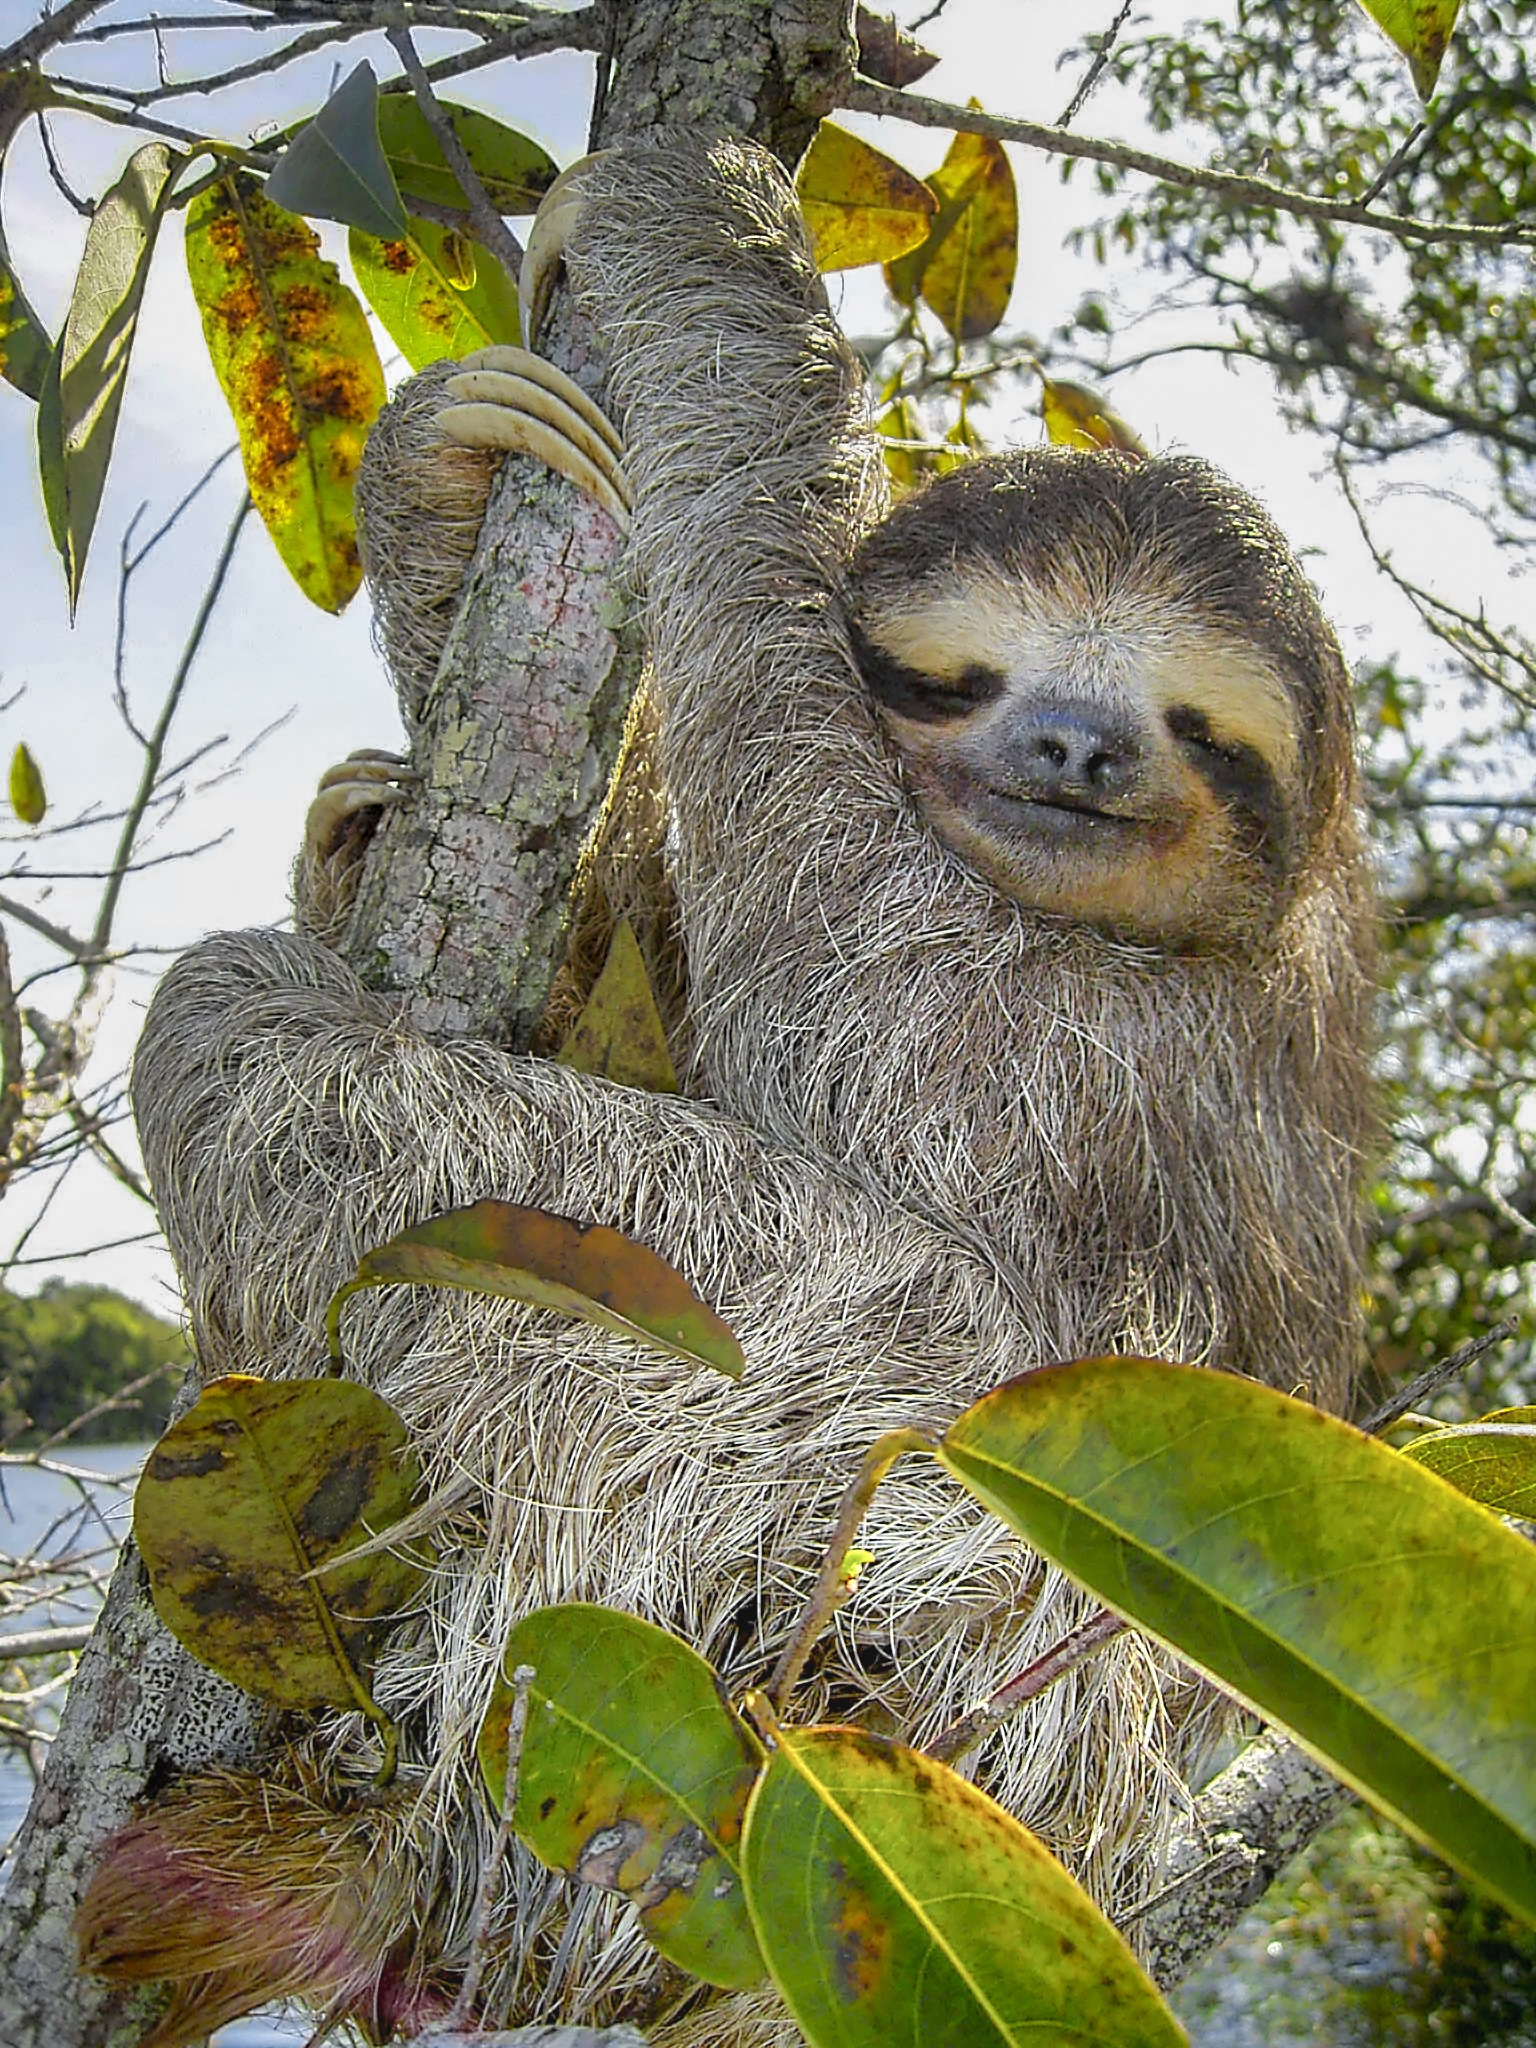 What You Need to Know About Sloth Ownership in Texas